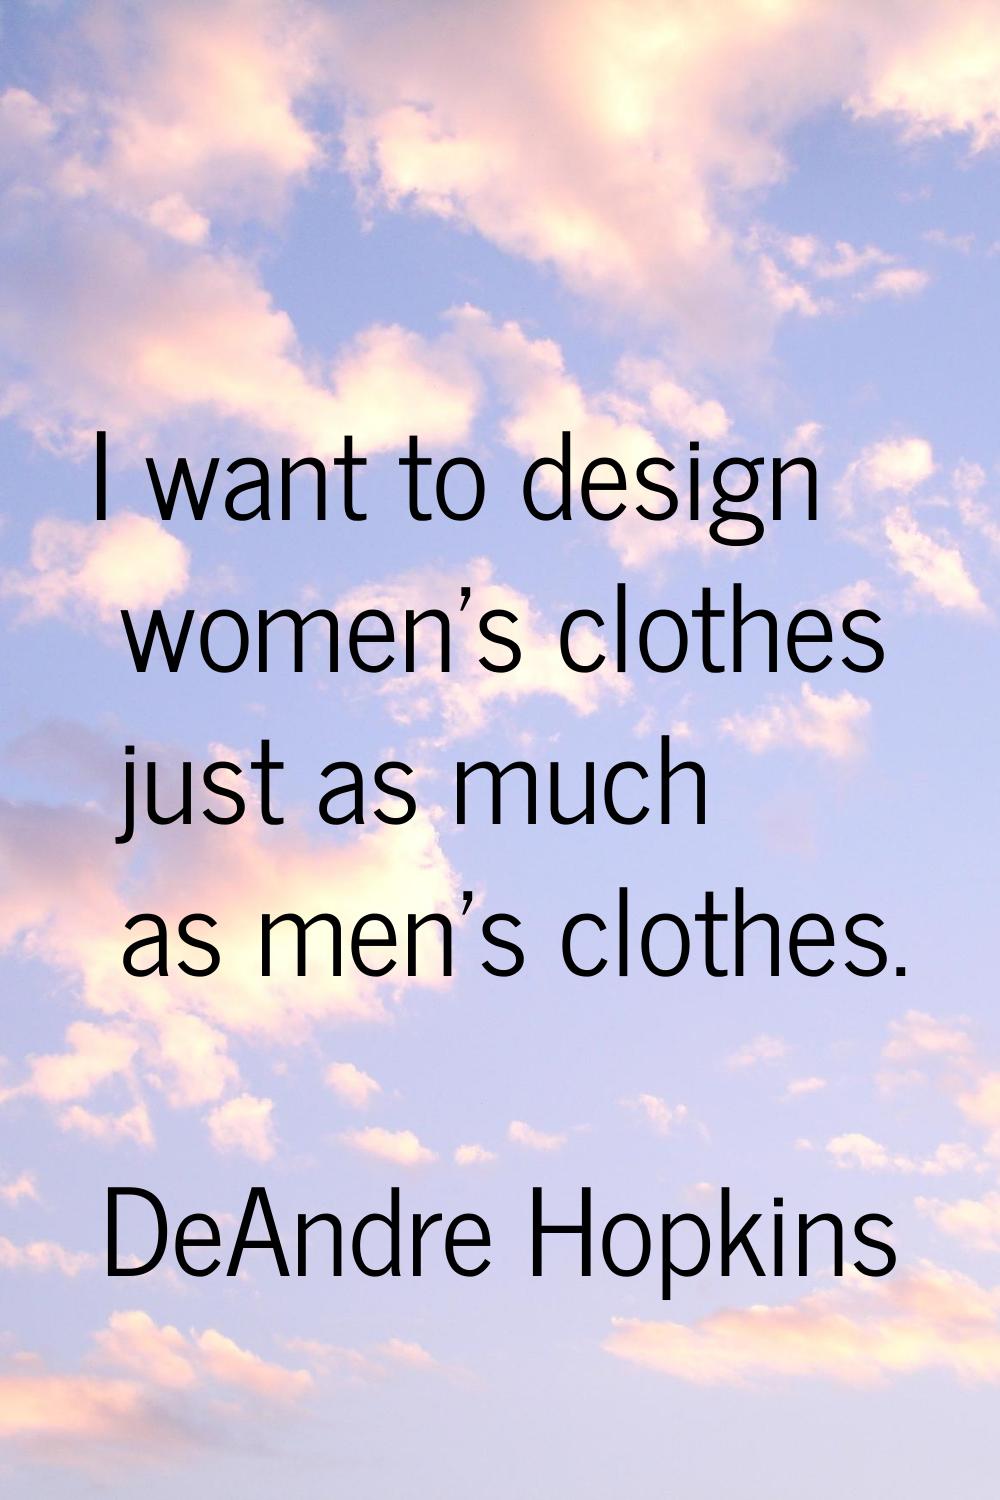 I want to design women's clothes just as much as men's clothes.